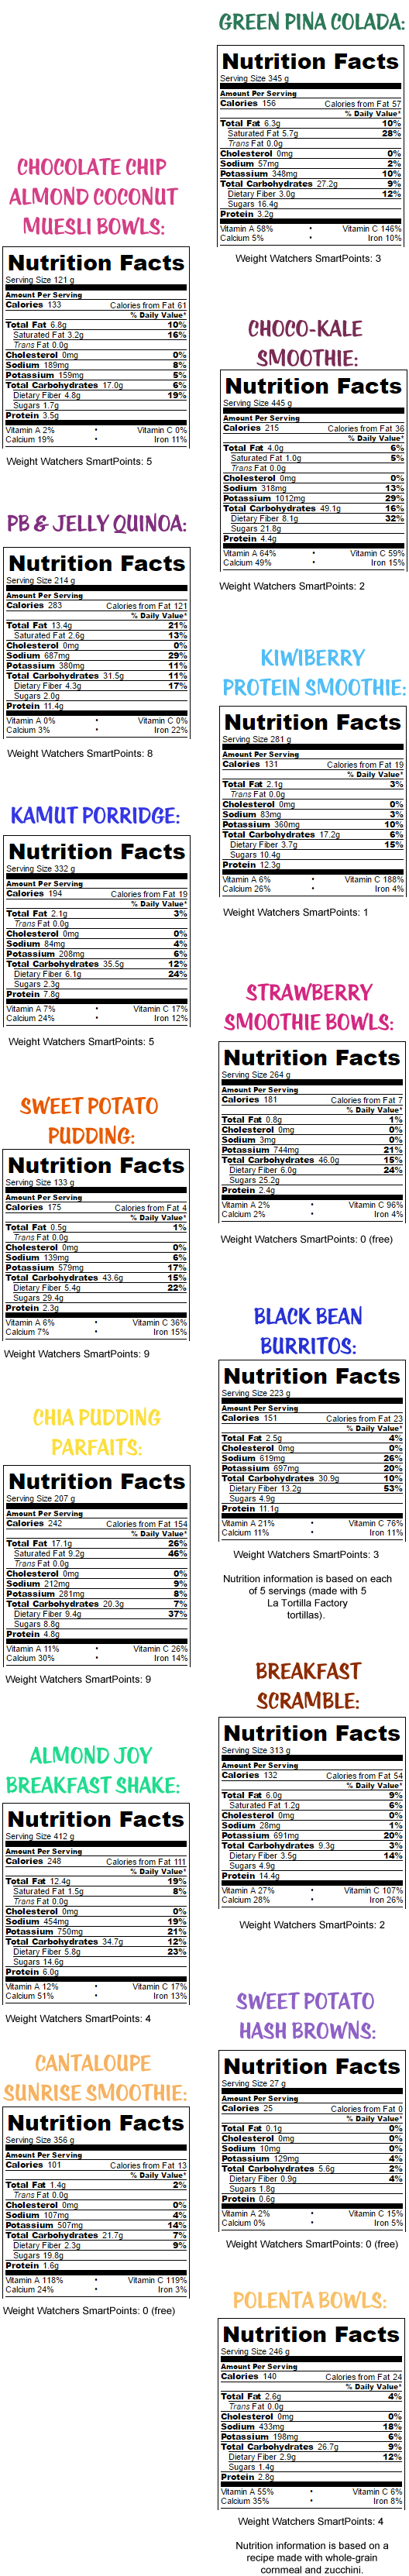 nutrition-facts-new